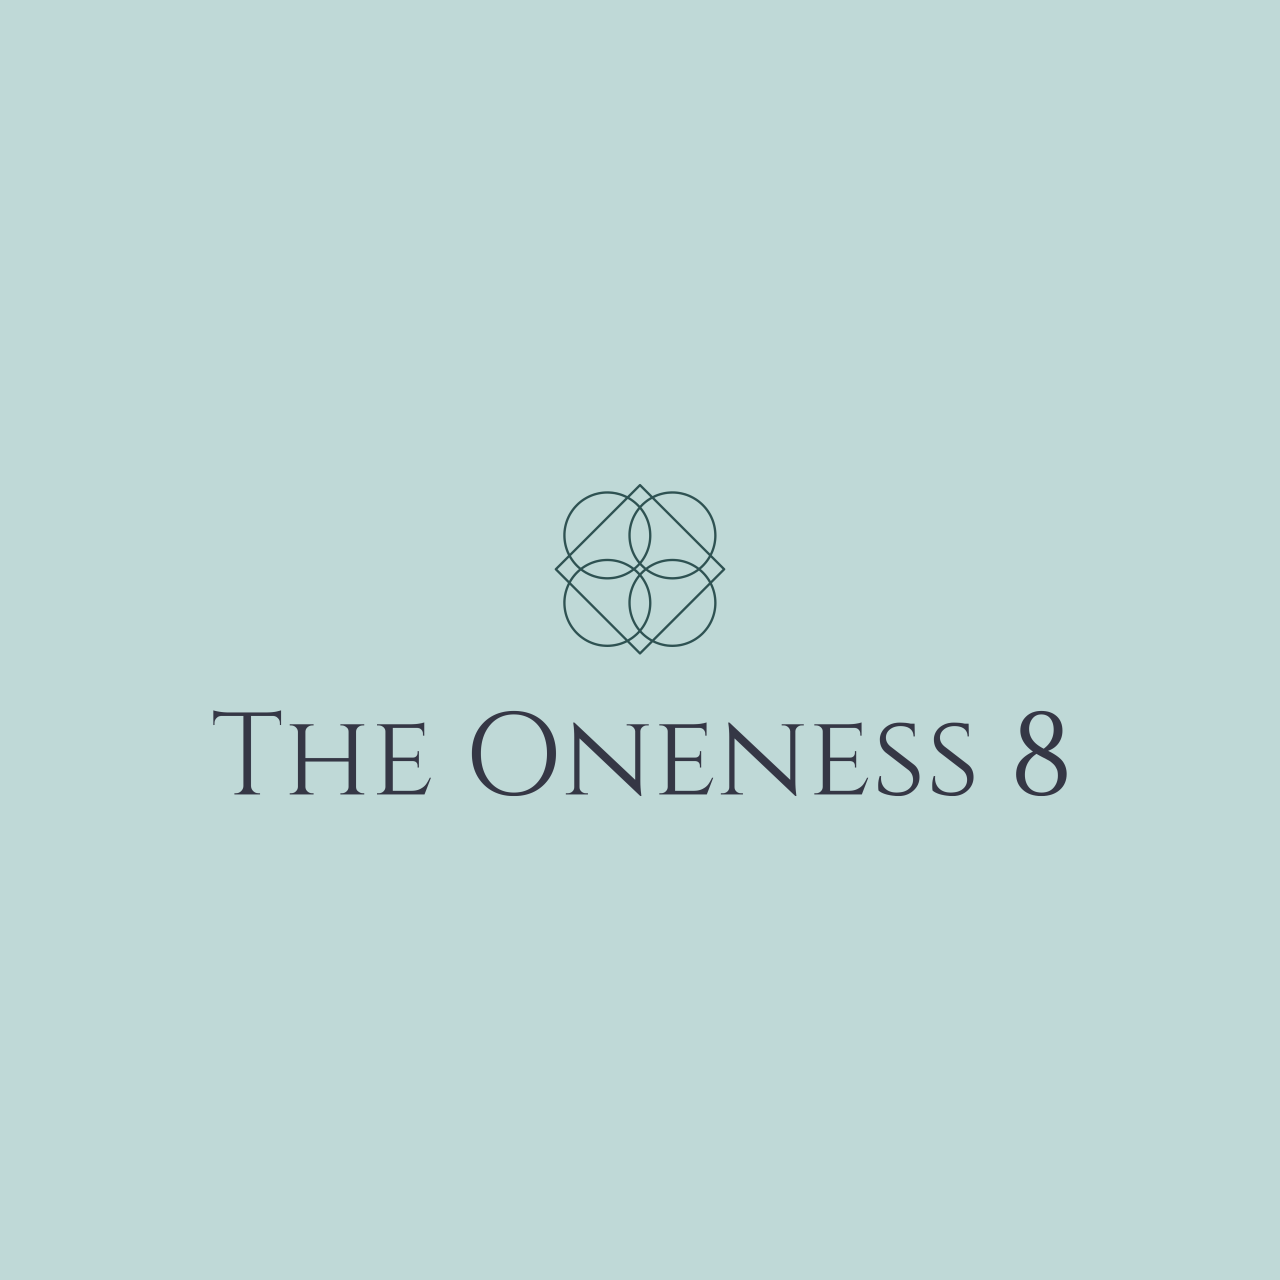 The Oneness 8